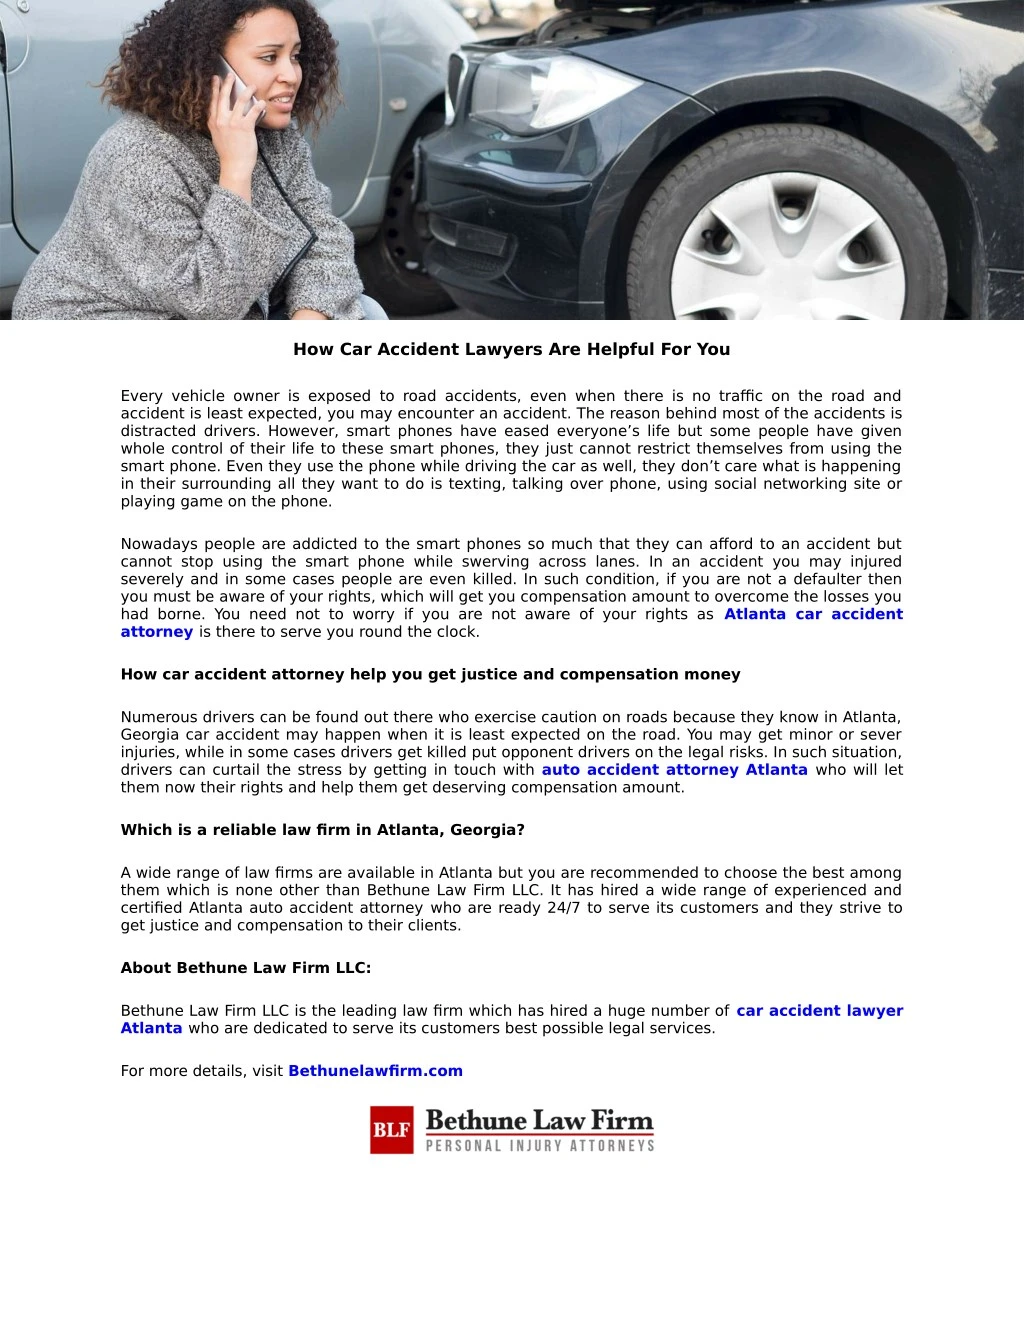 how car accident lawyers are helpful for you